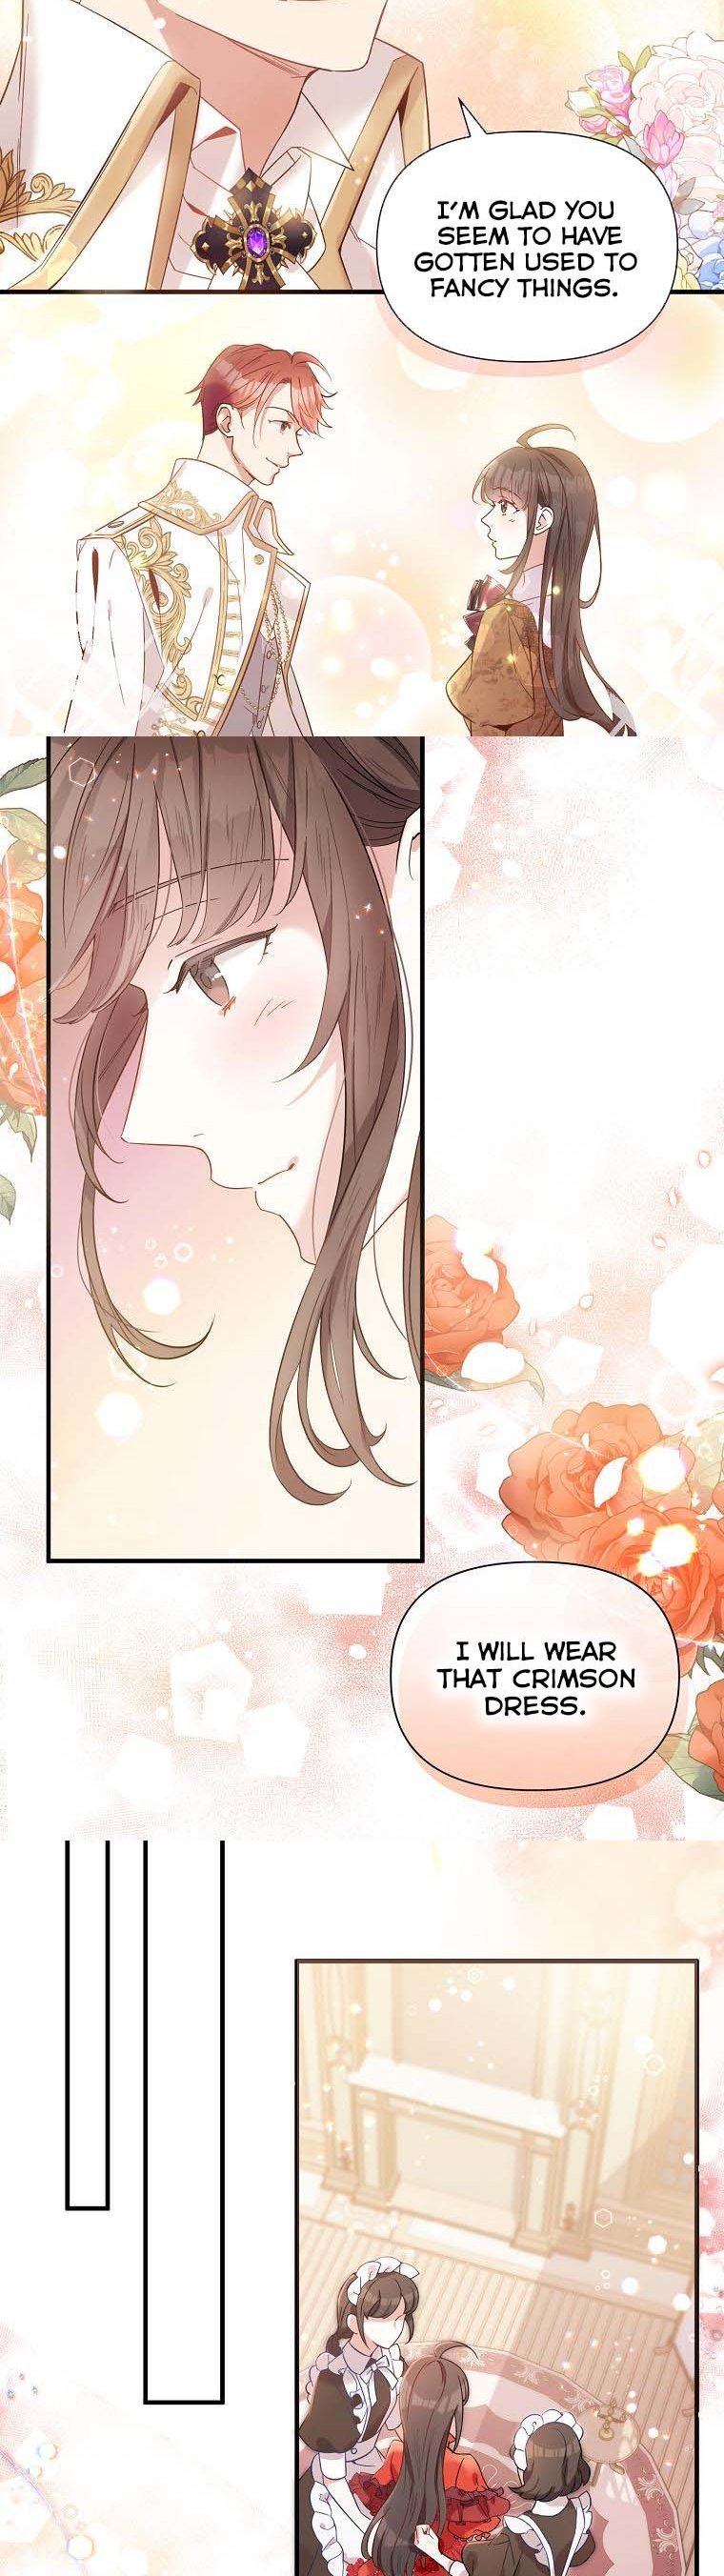 Marriage B chapter 17